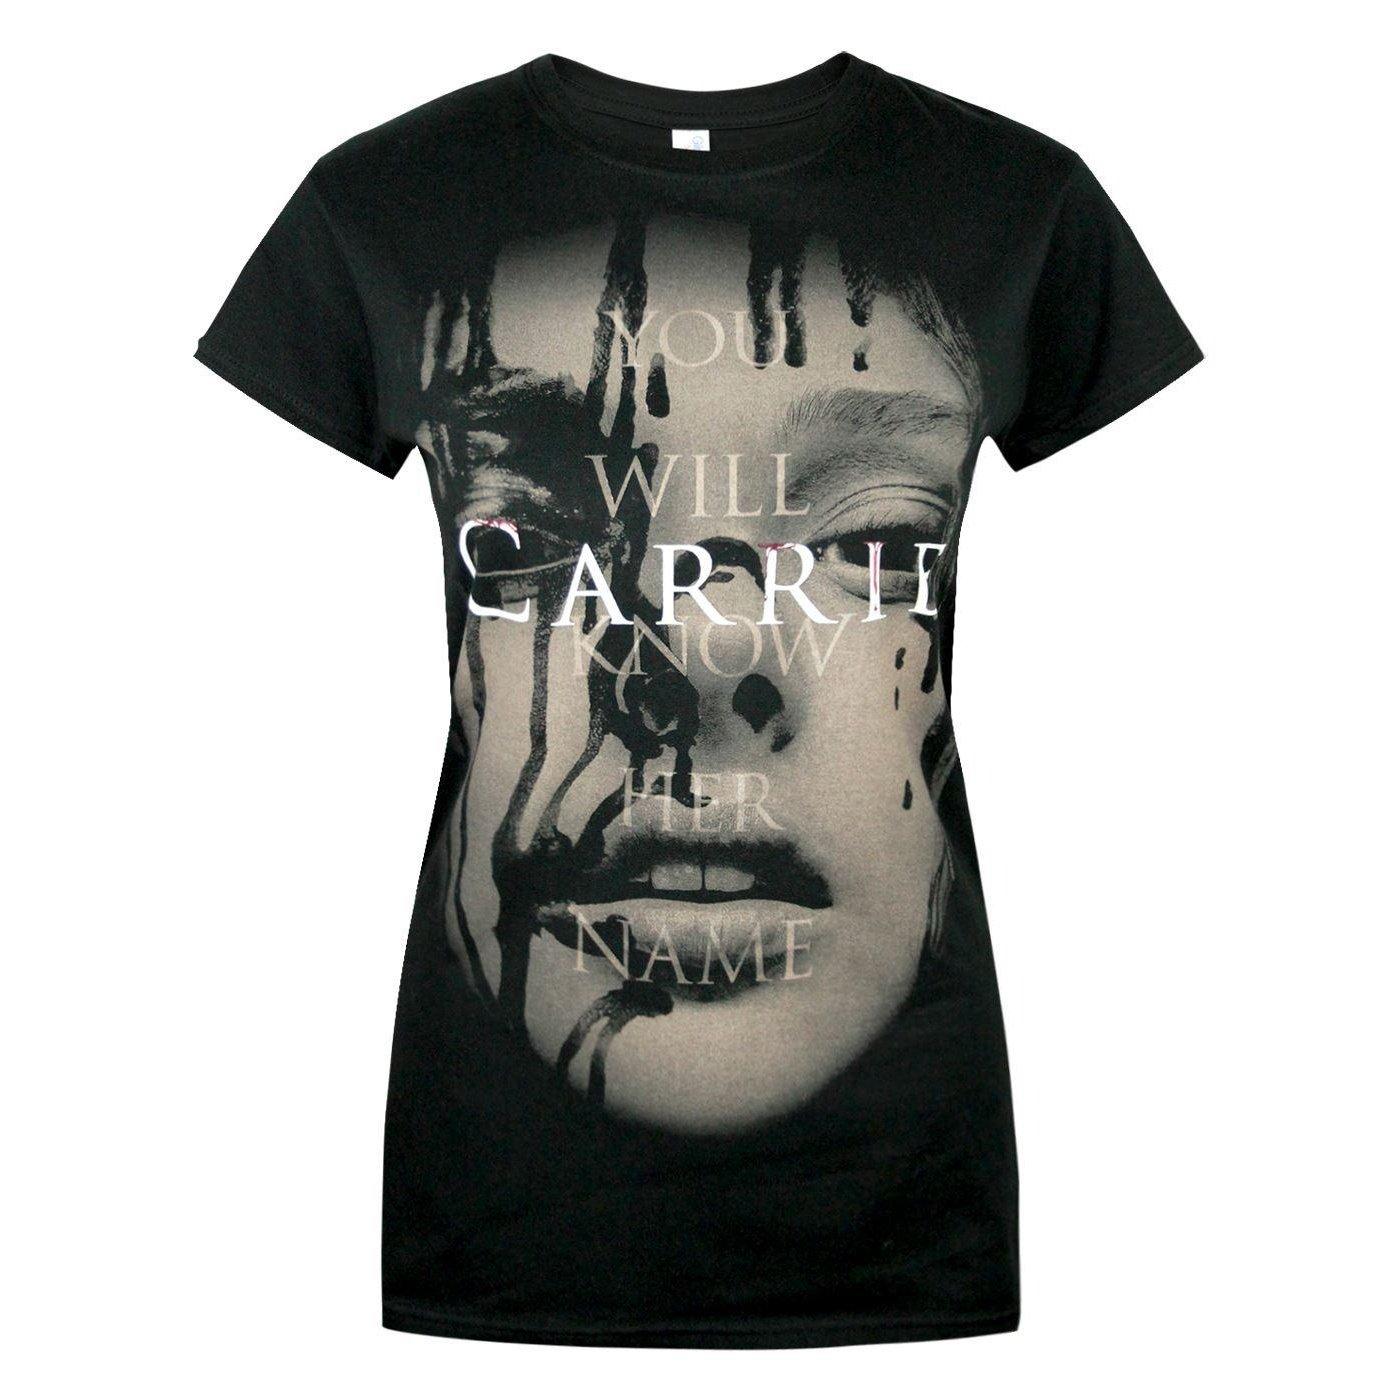 Image of Carrie The Movie 2013 TShirt - XL